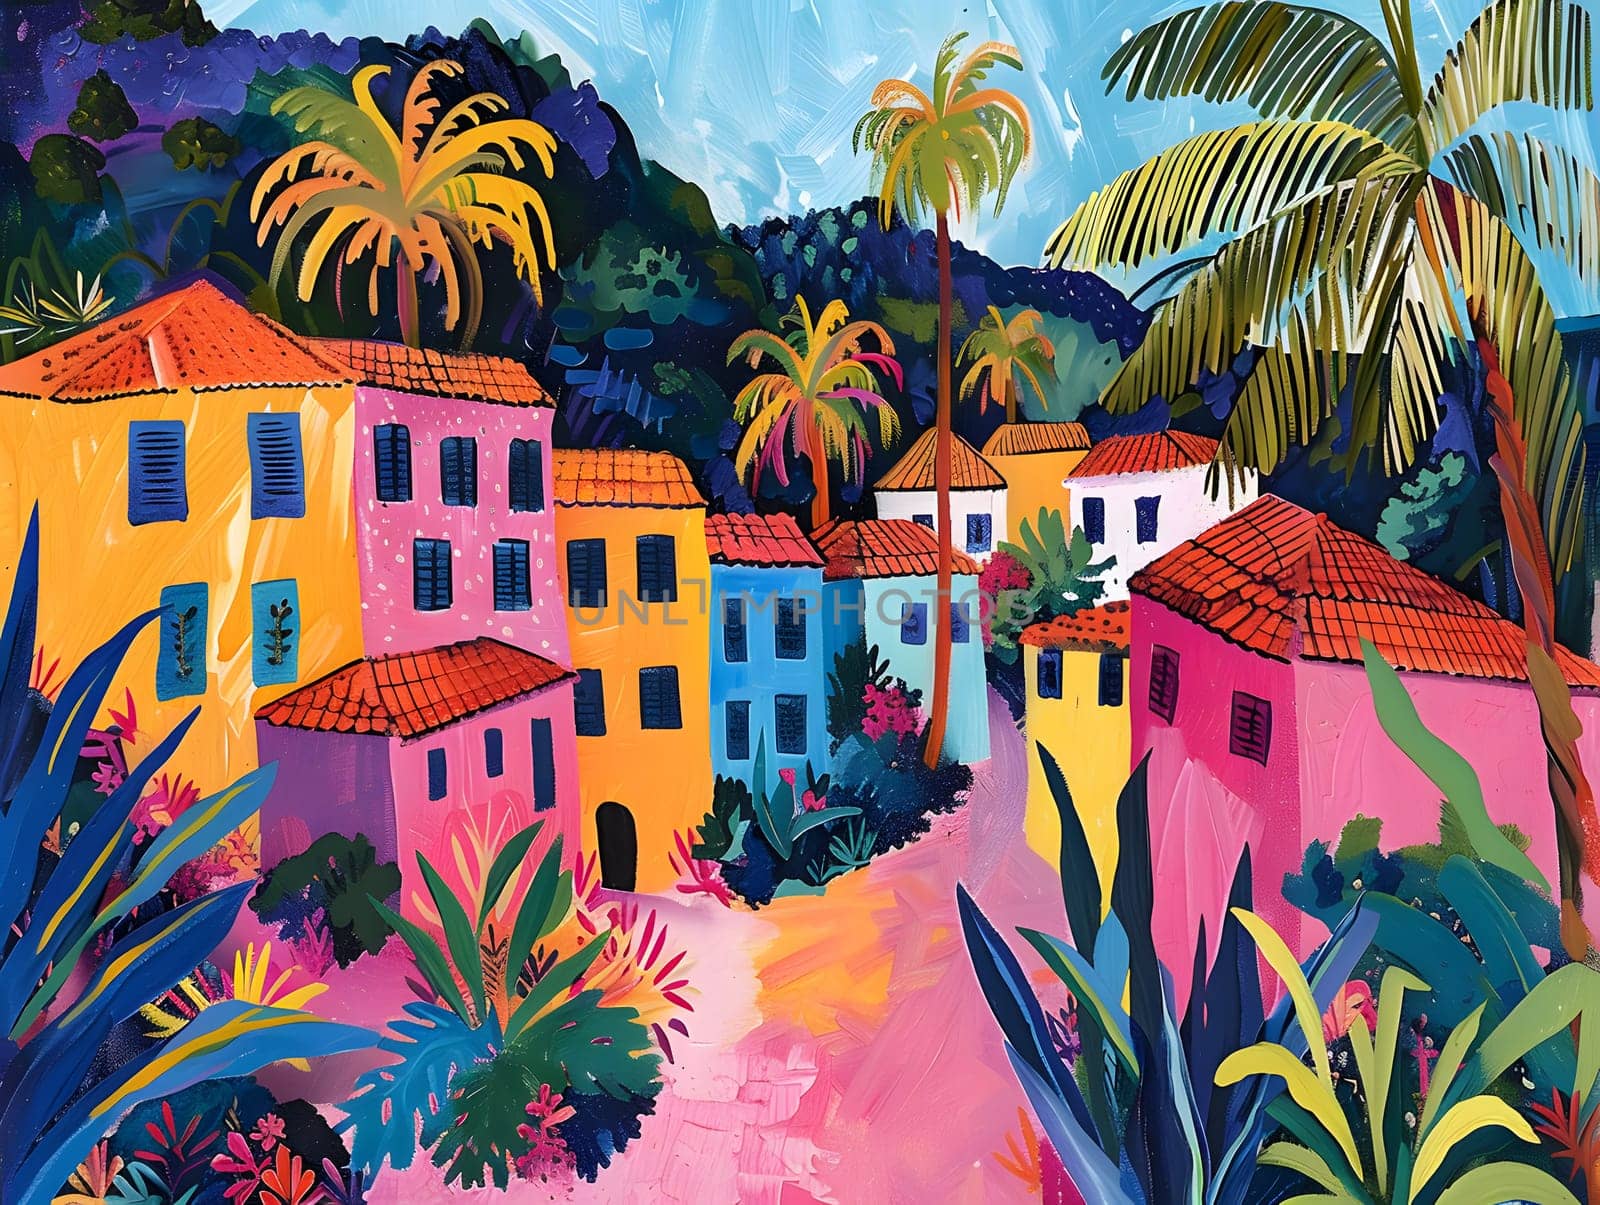 a painting of a tropical village with colorful houses and palm trees by Nadtochiy